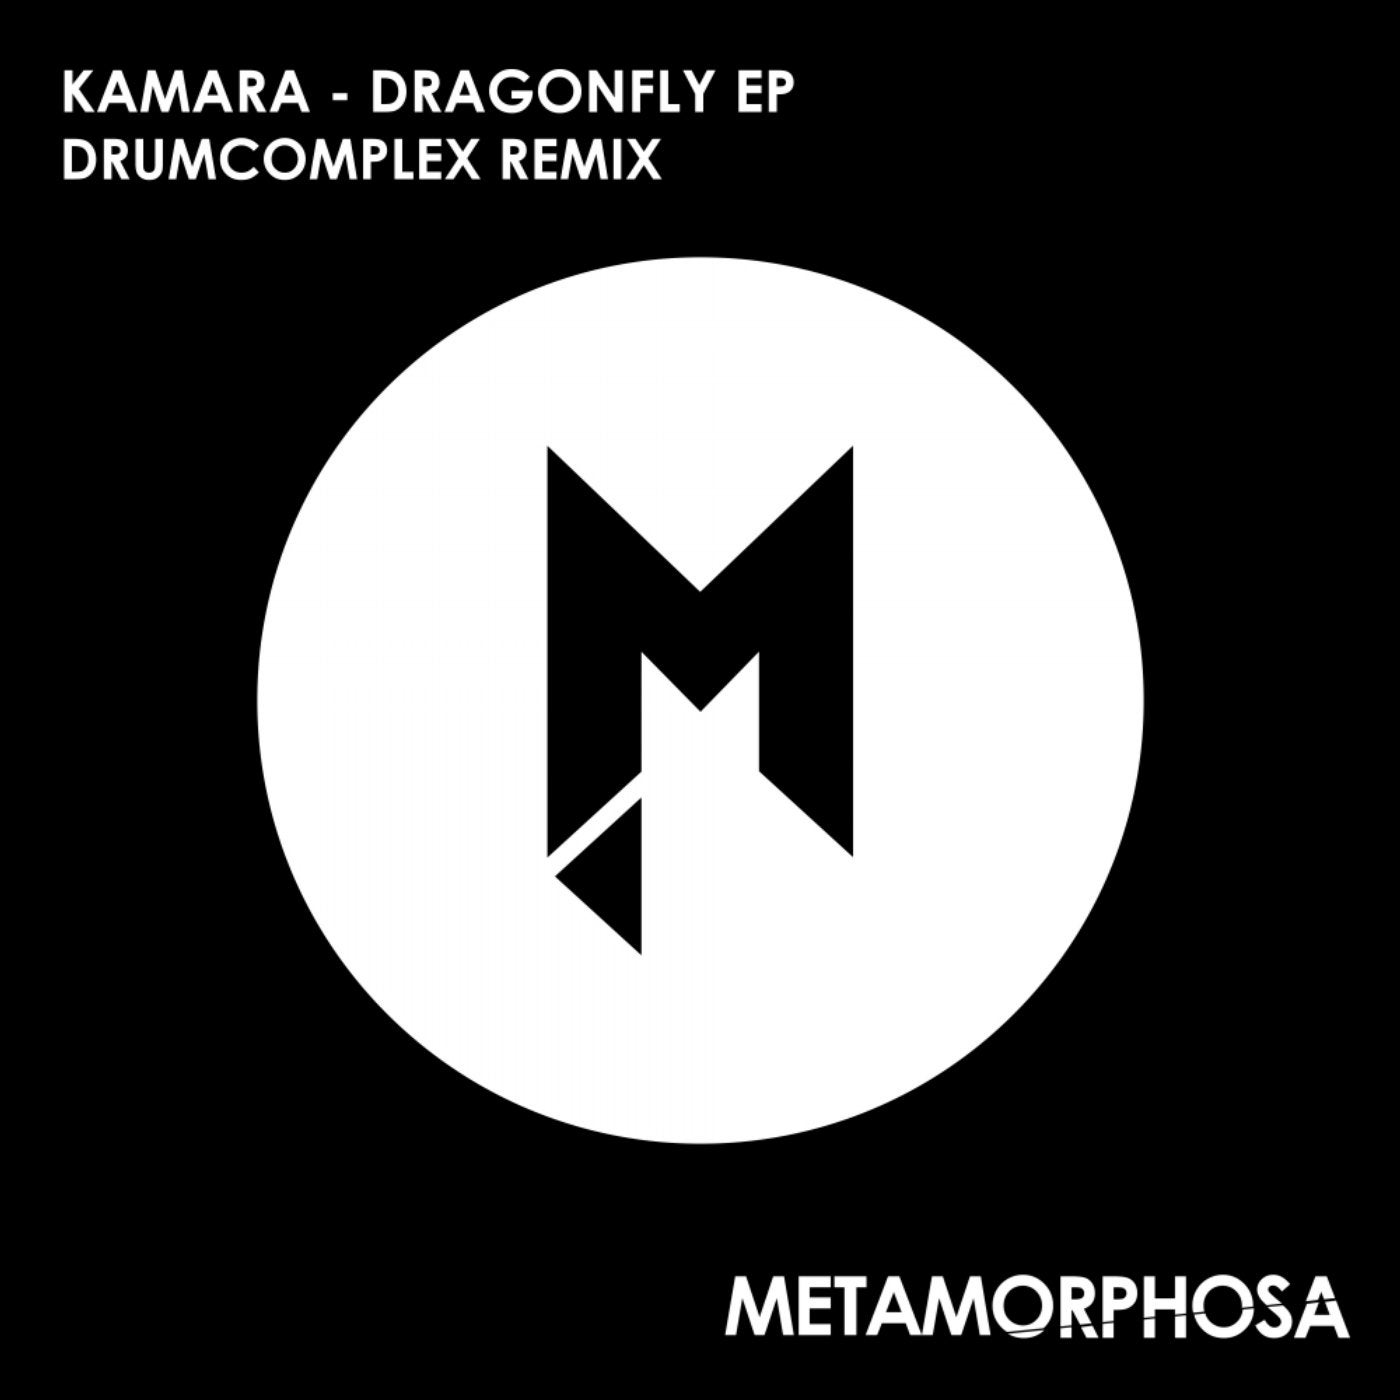 Dragonfly EP